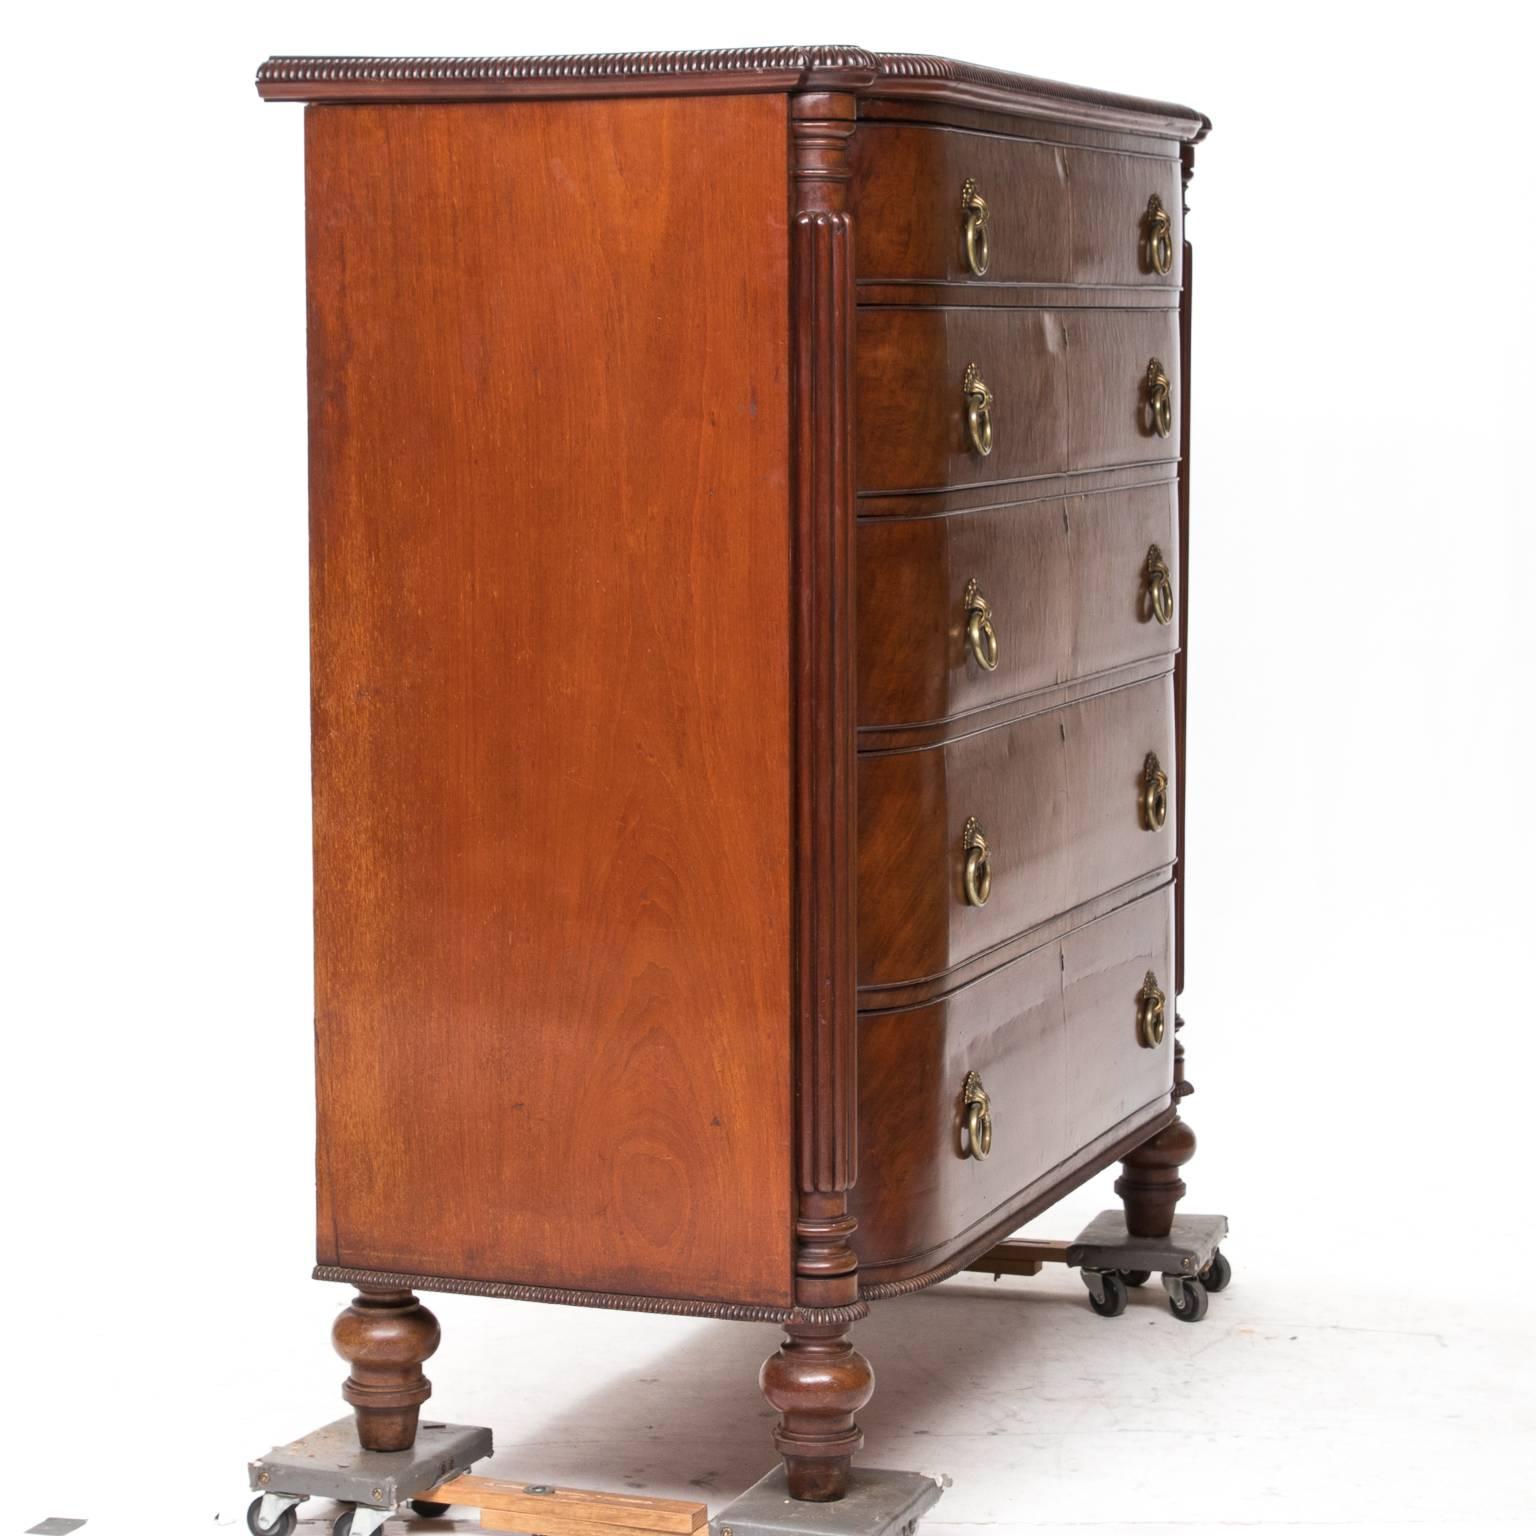 19th C. English mahogany chest of drawers in the Regency style. The front has a bow front and turned fluted columns corners. Notice the moldings present on the top and base are very defined. There are five graduated drawers with substantial brass